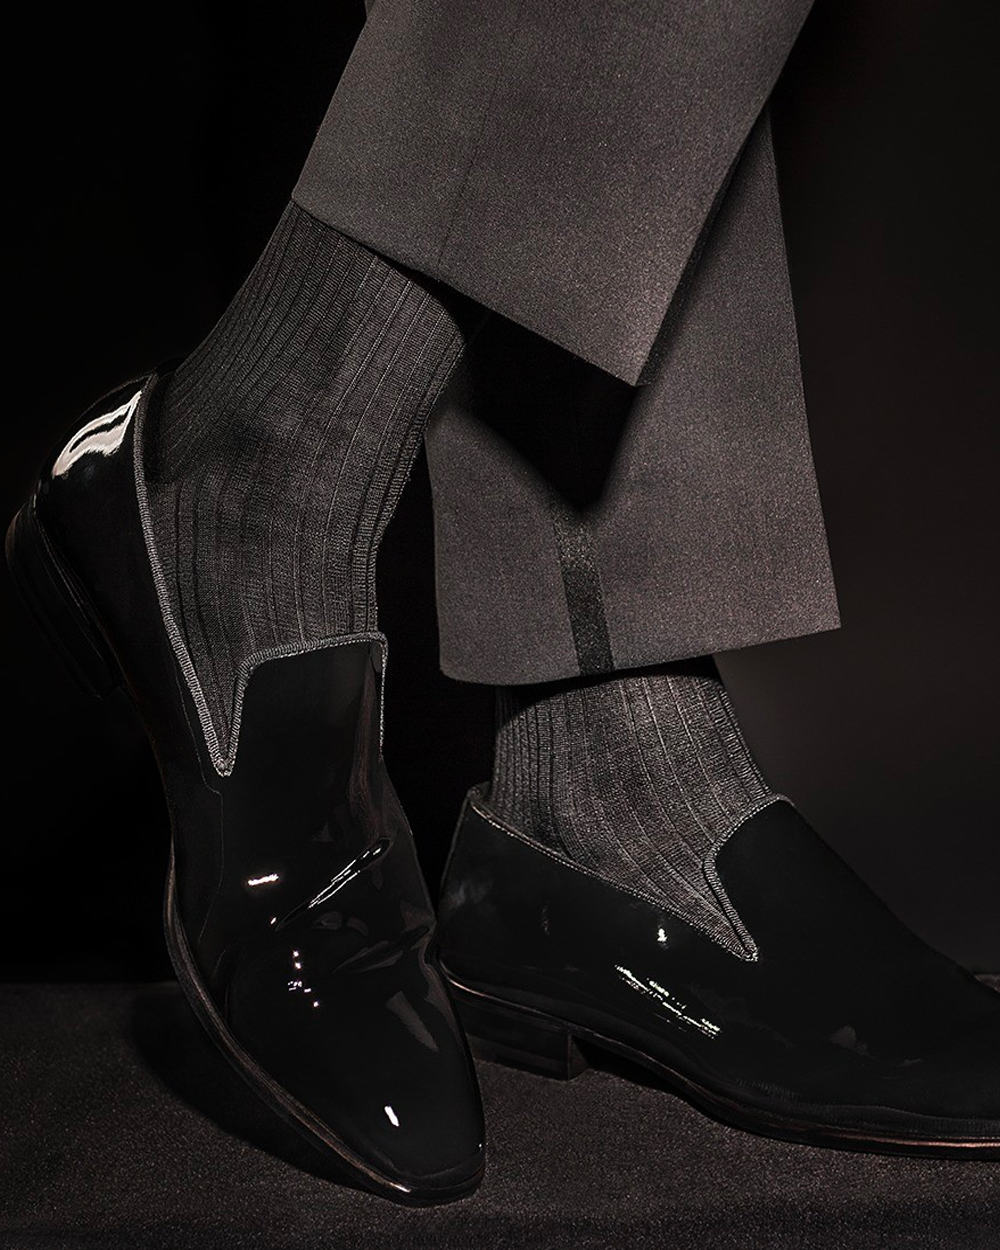 Man wearing William Abraham luxury charcoal dress socks with black patent slippers and tuxedo pants